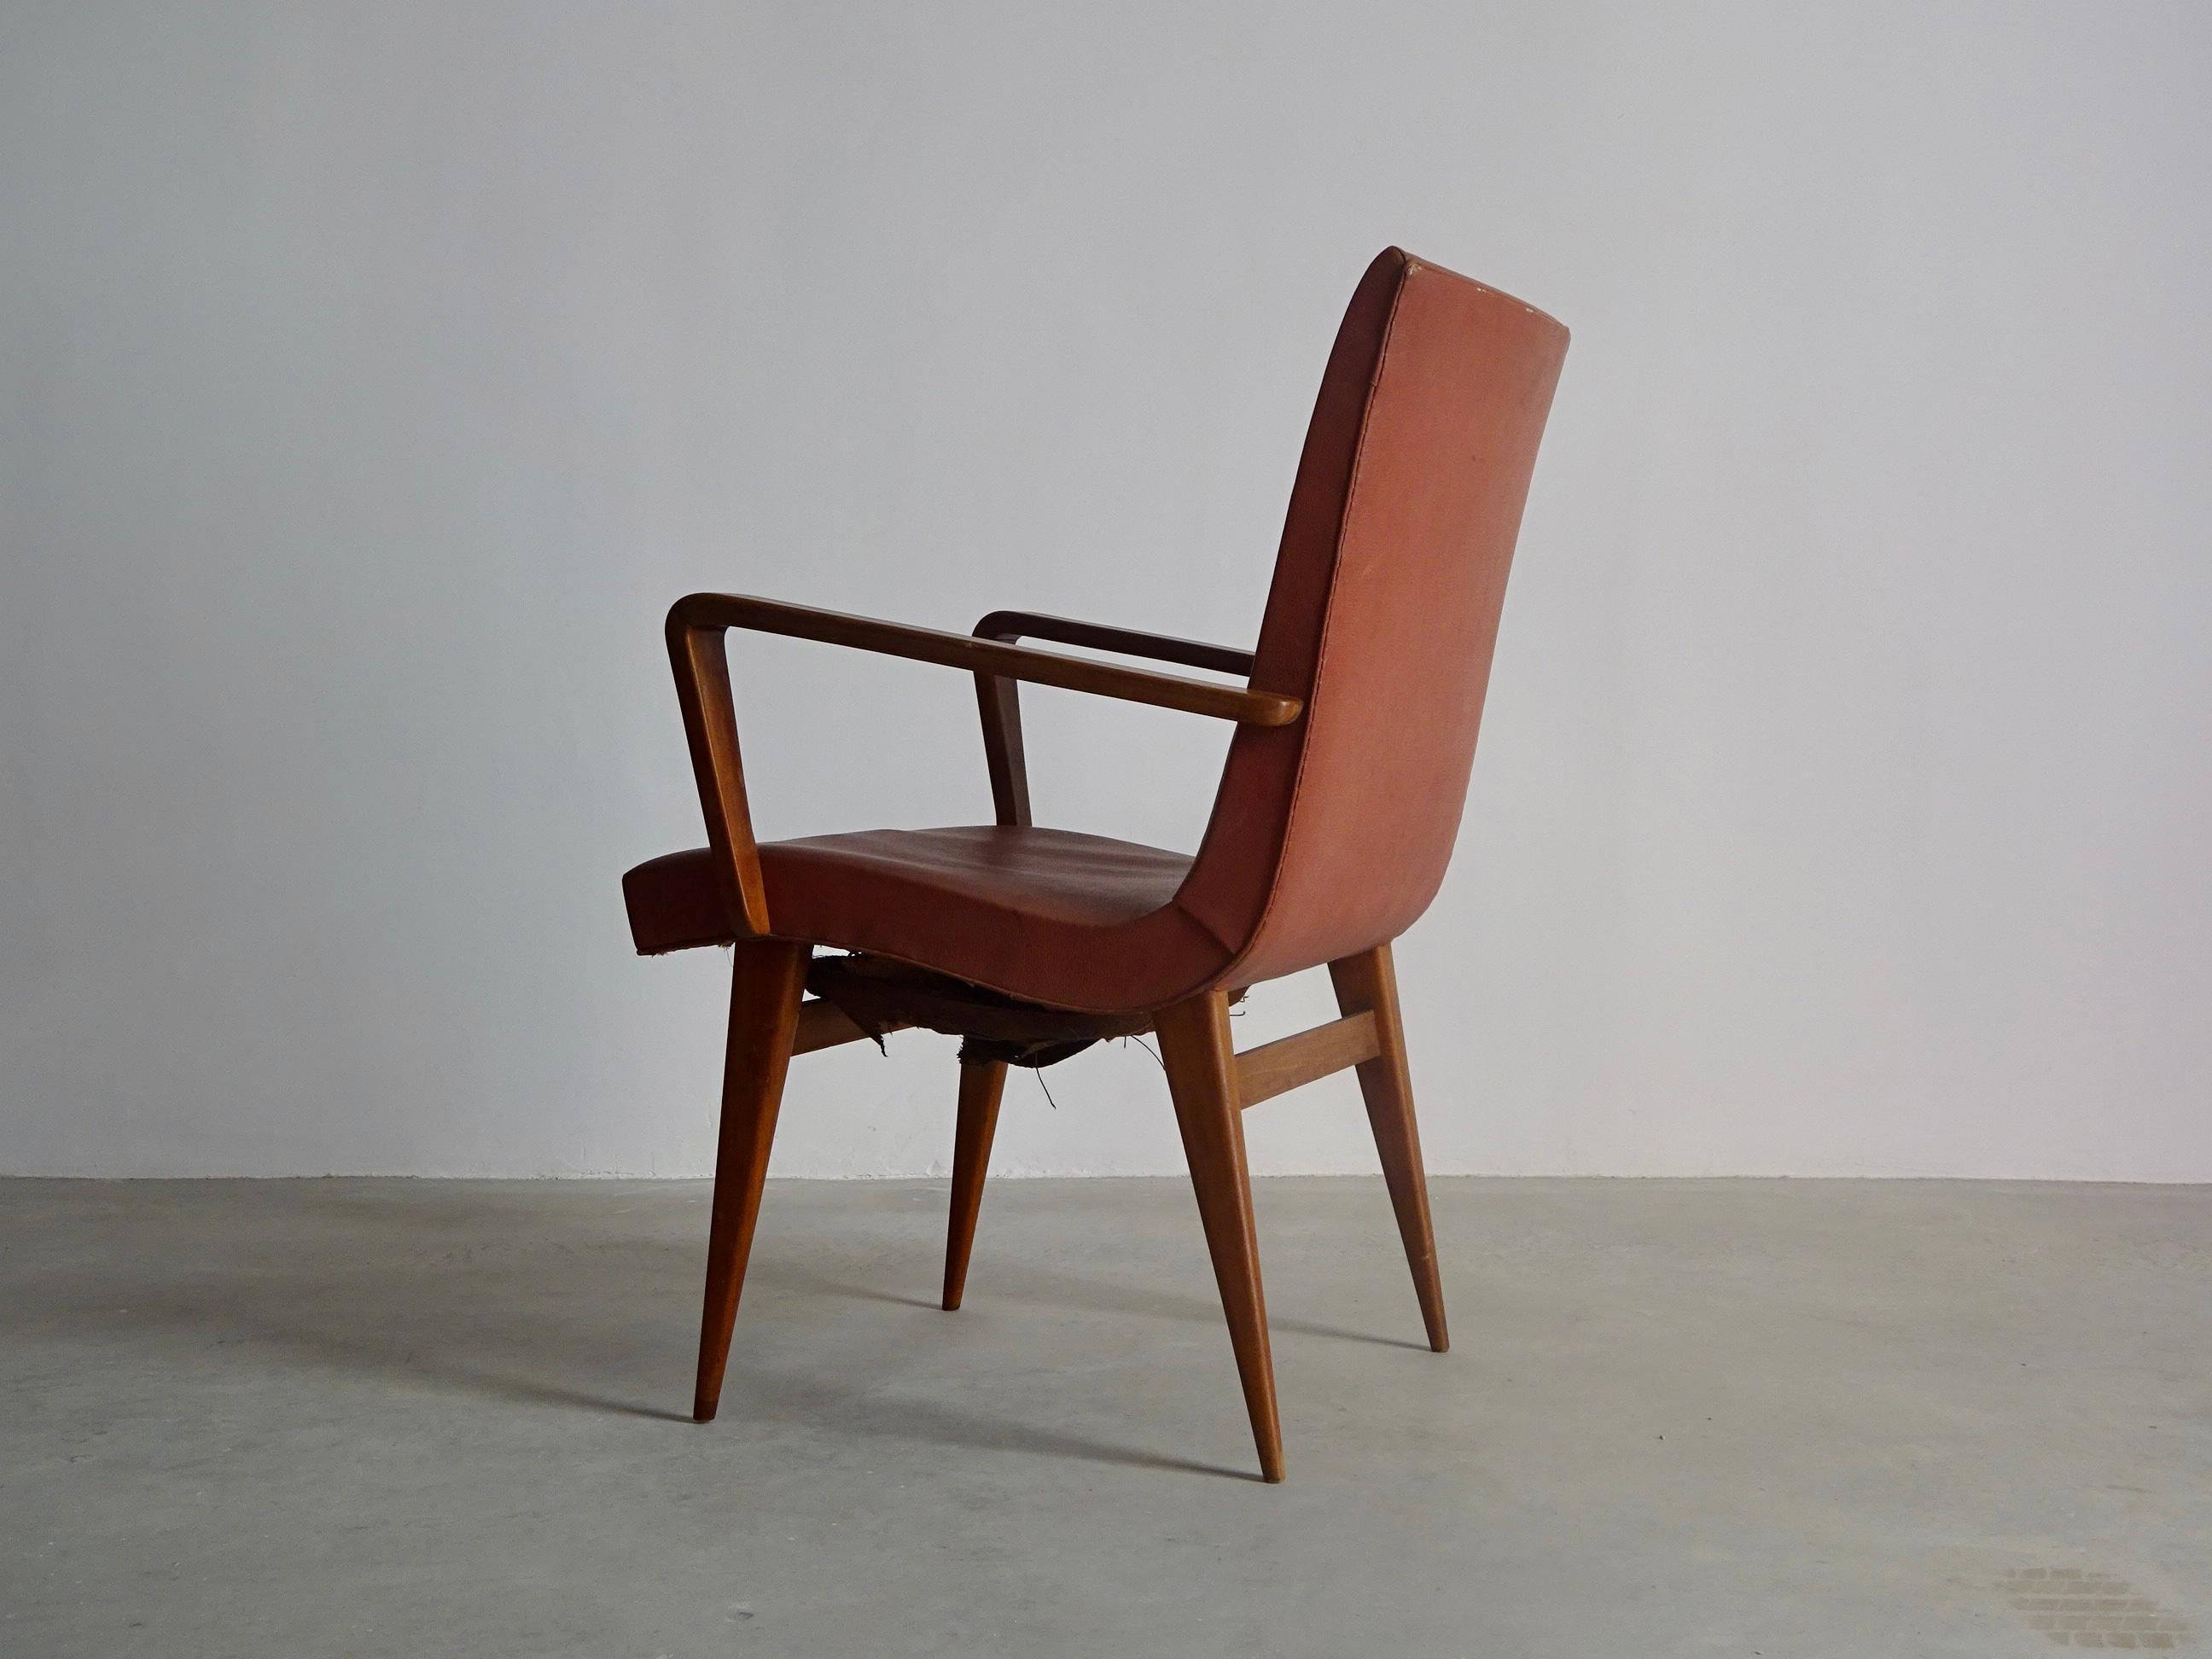 Beautiful chair with arms produced in Brazil in the 1950s with a high quality wood called 